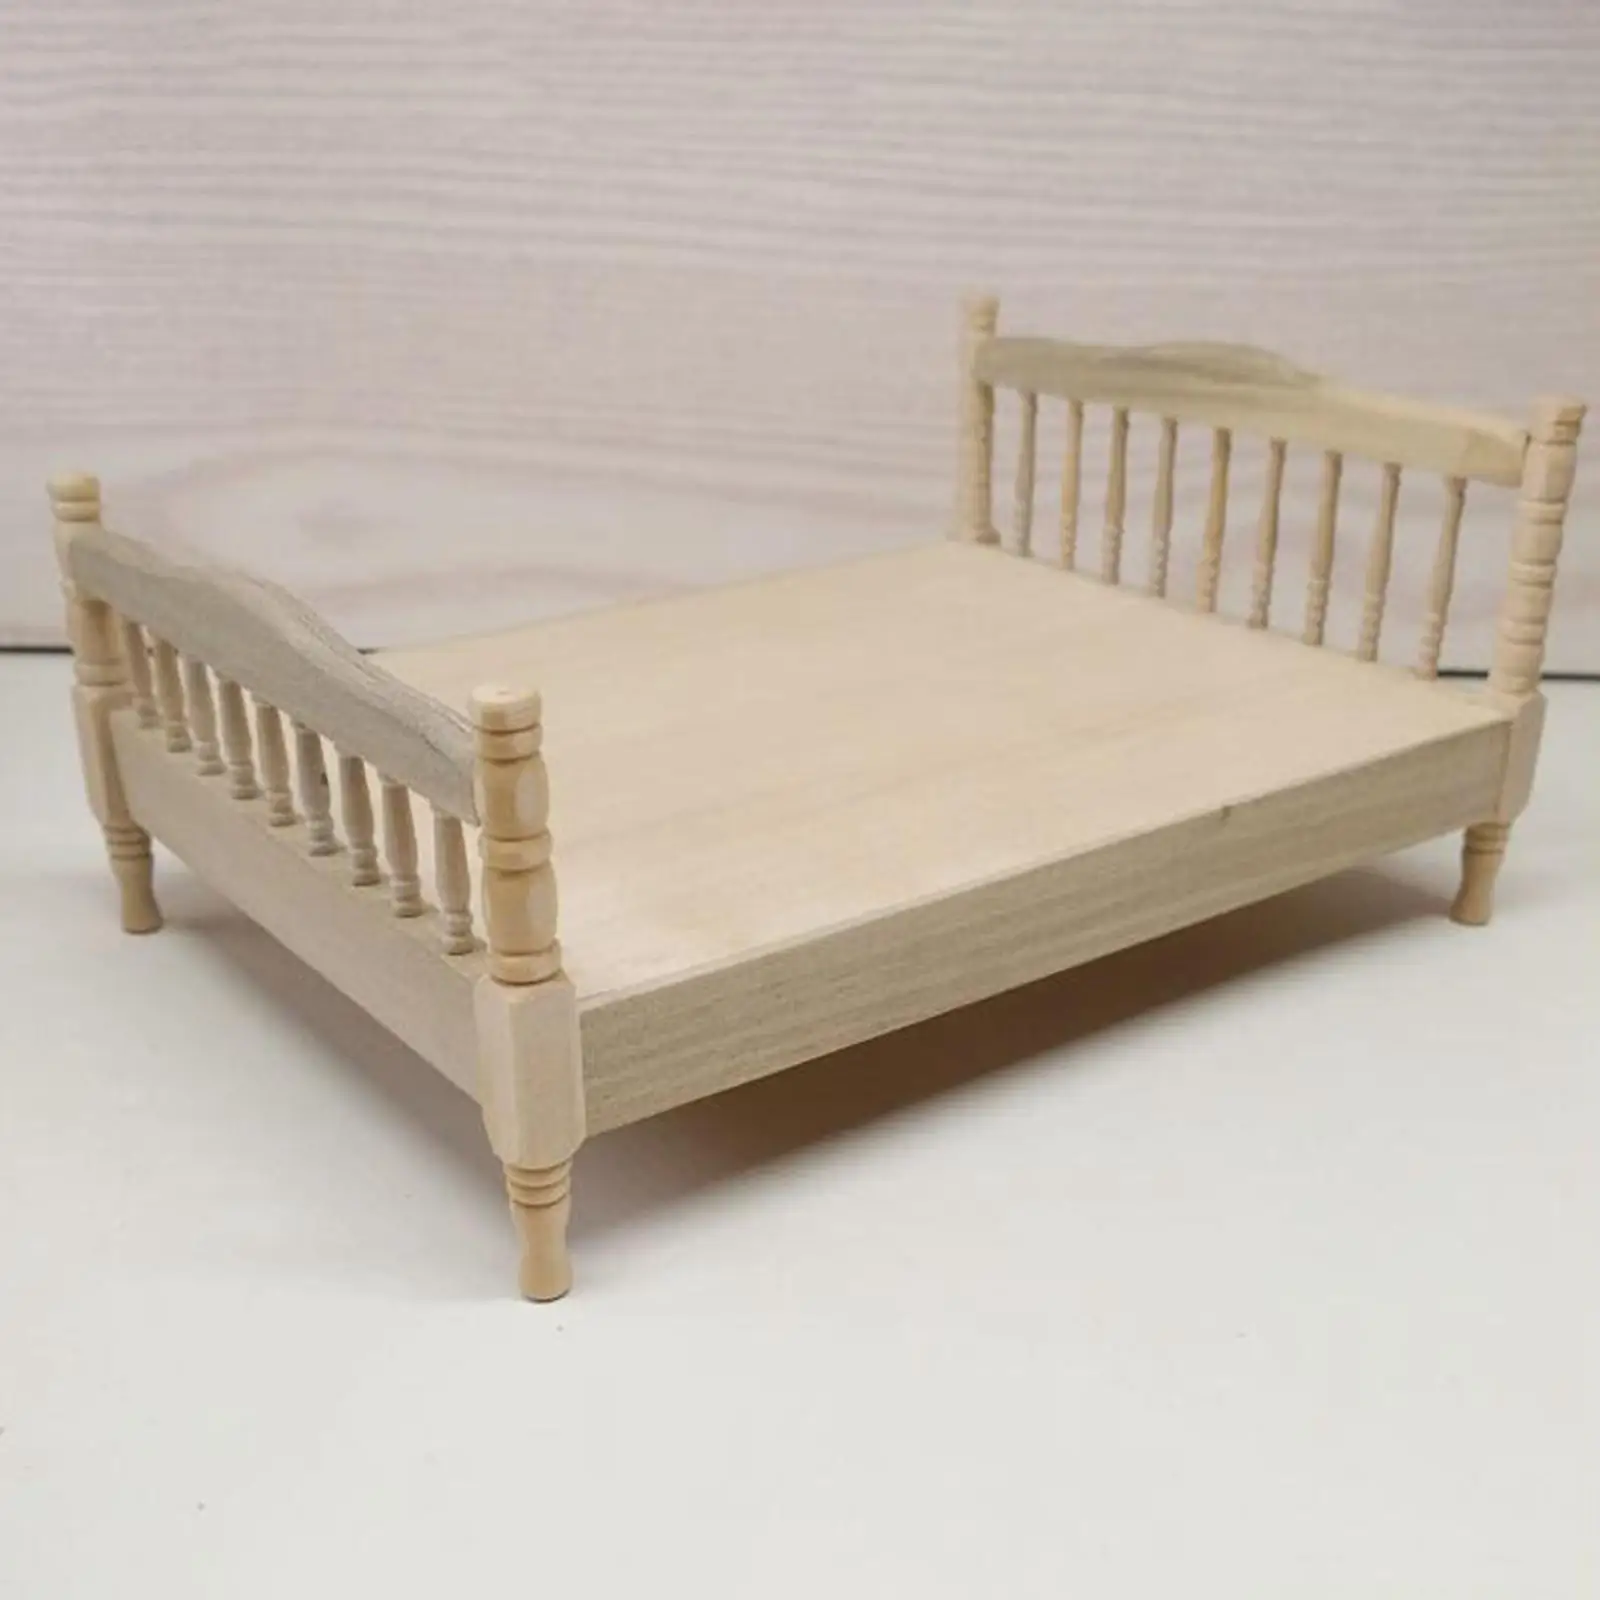 1:12 Dollhouse Double Bed Craft for Model Train Accessories Decoration